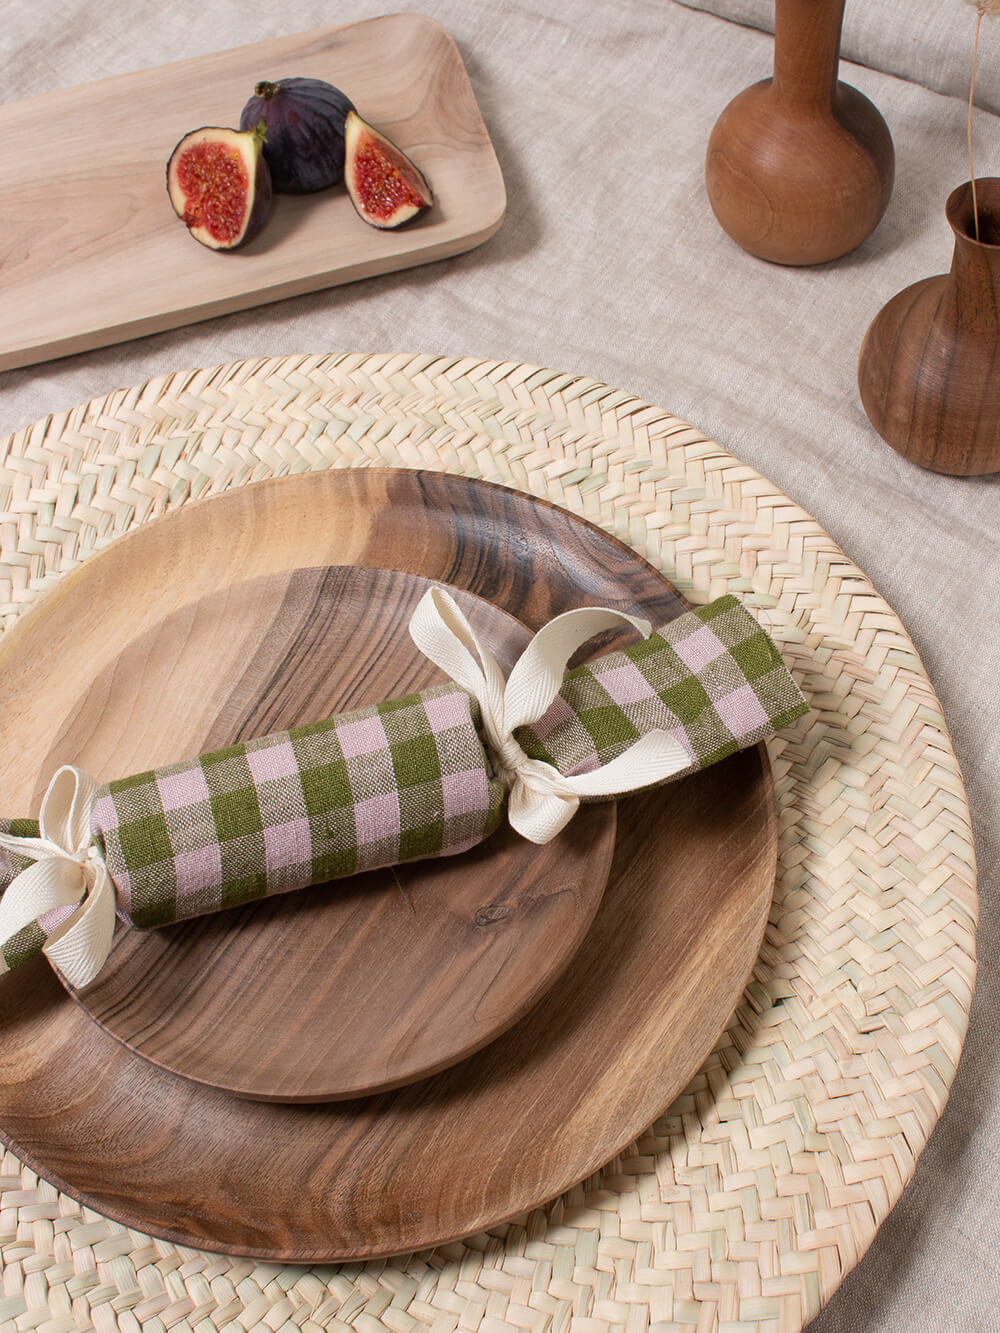 Wooden plates with a christmas cracker made of soft gingham fabric, on woven placemats and natural linen tablecloth